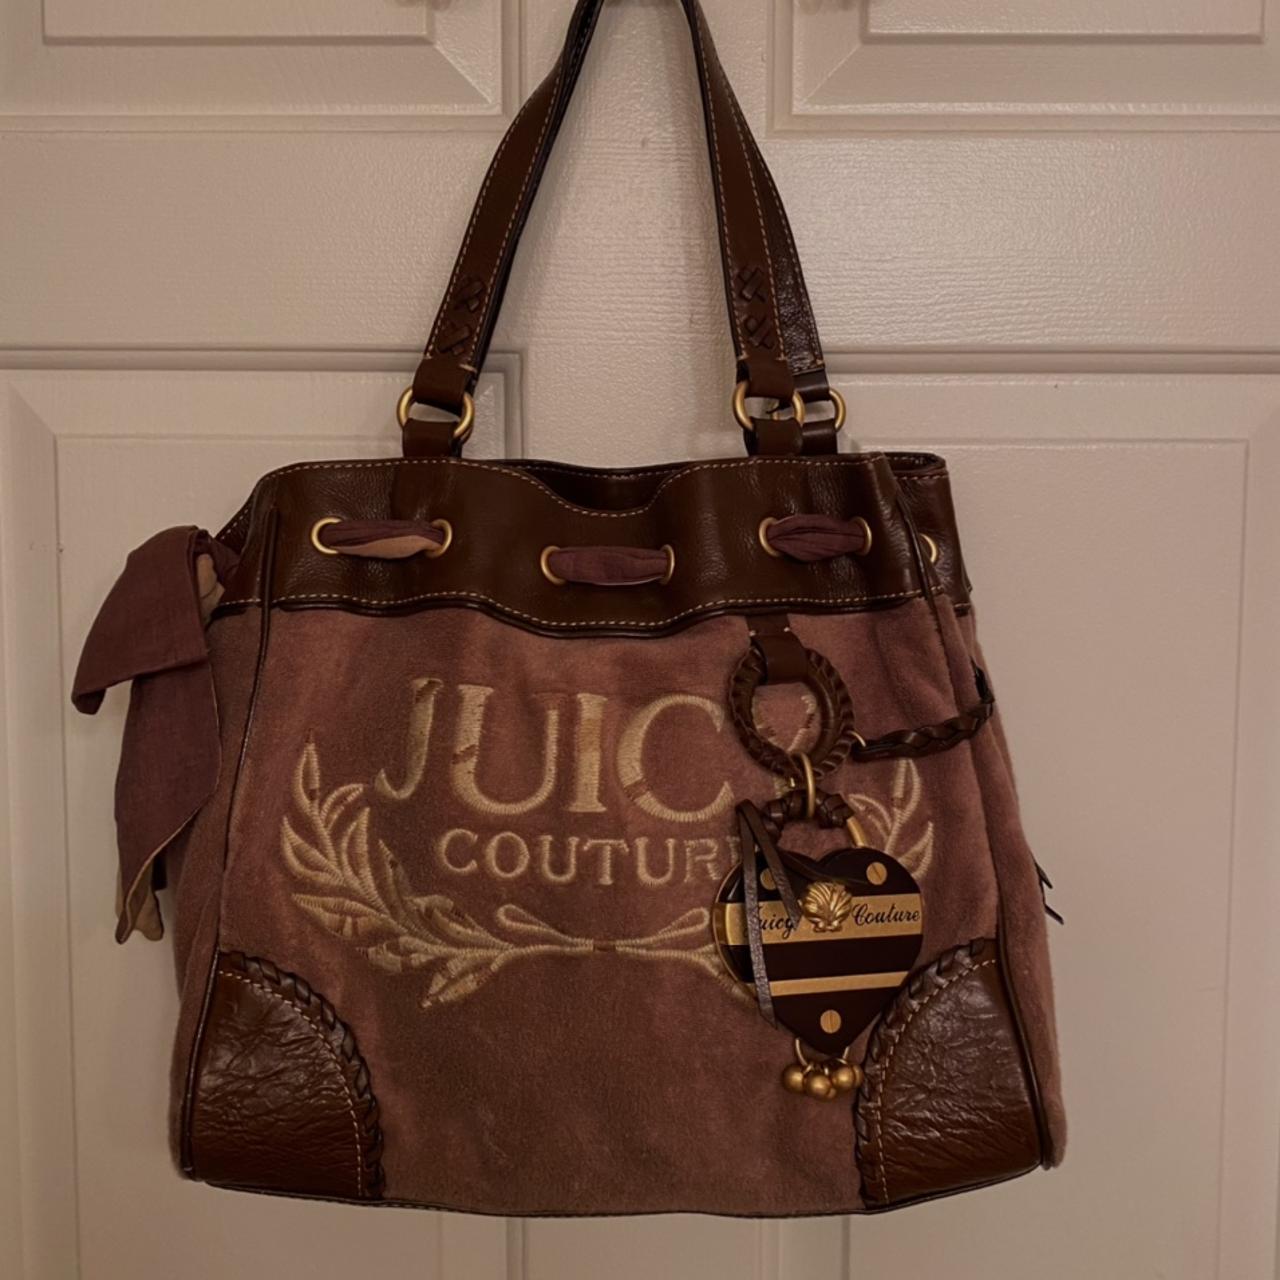 Juicy Couture Hand Bag purchased from Macy's a... - Depop